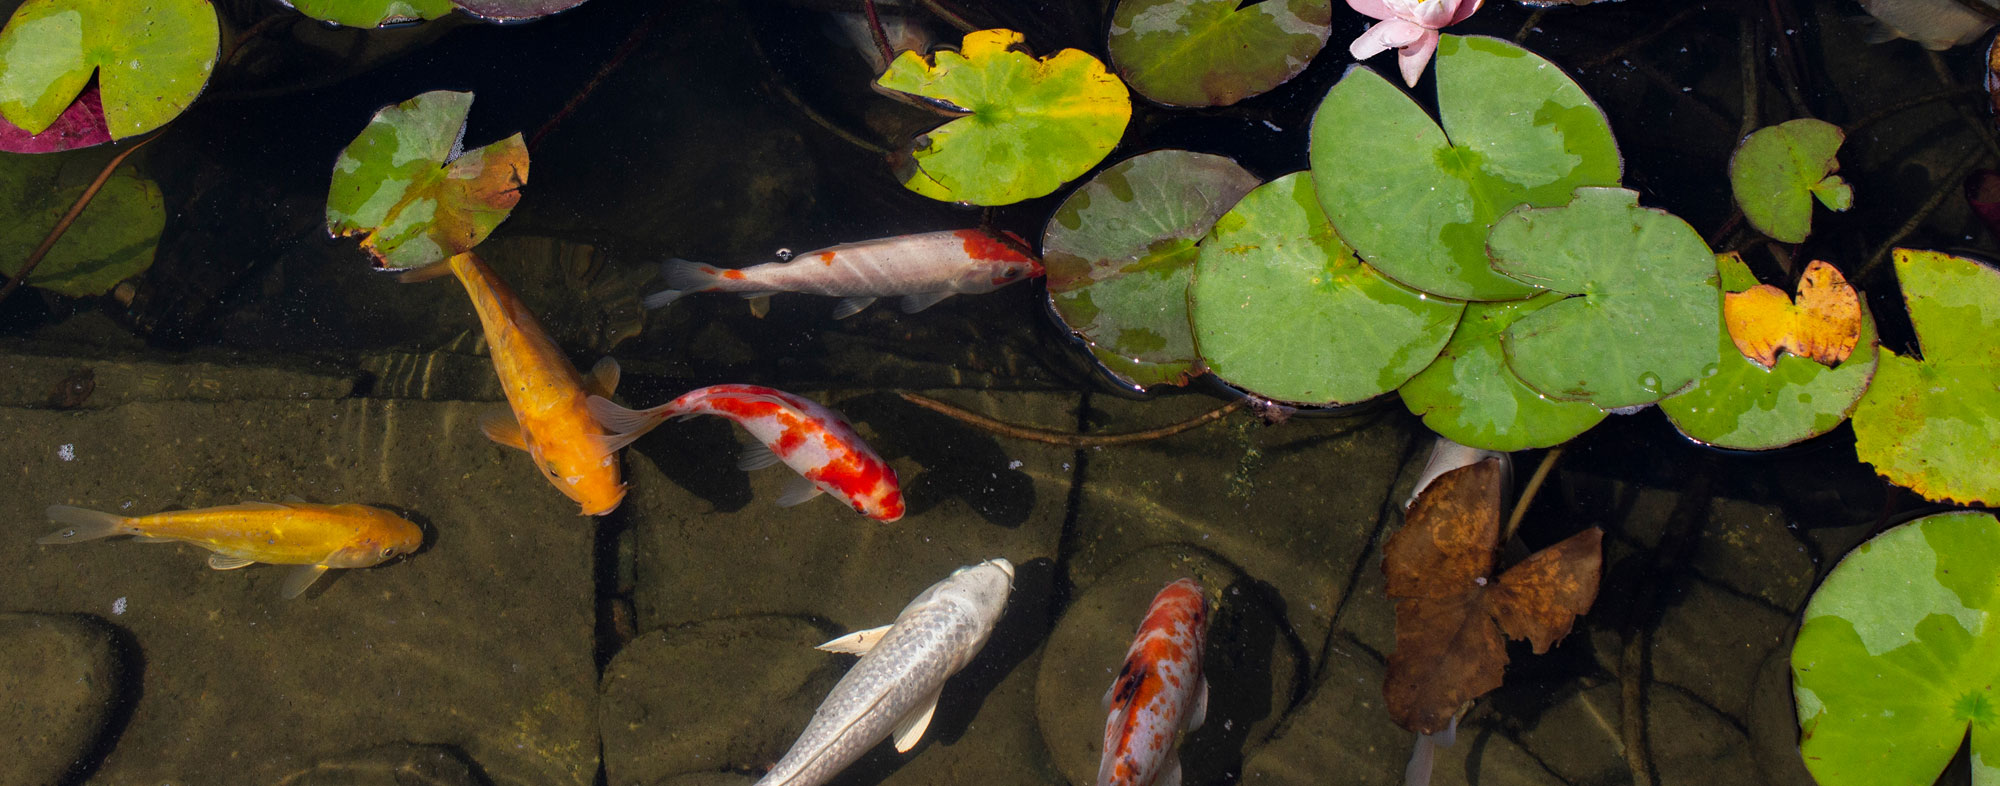 Supply your fish with an outdoor aquarium populated with live plants